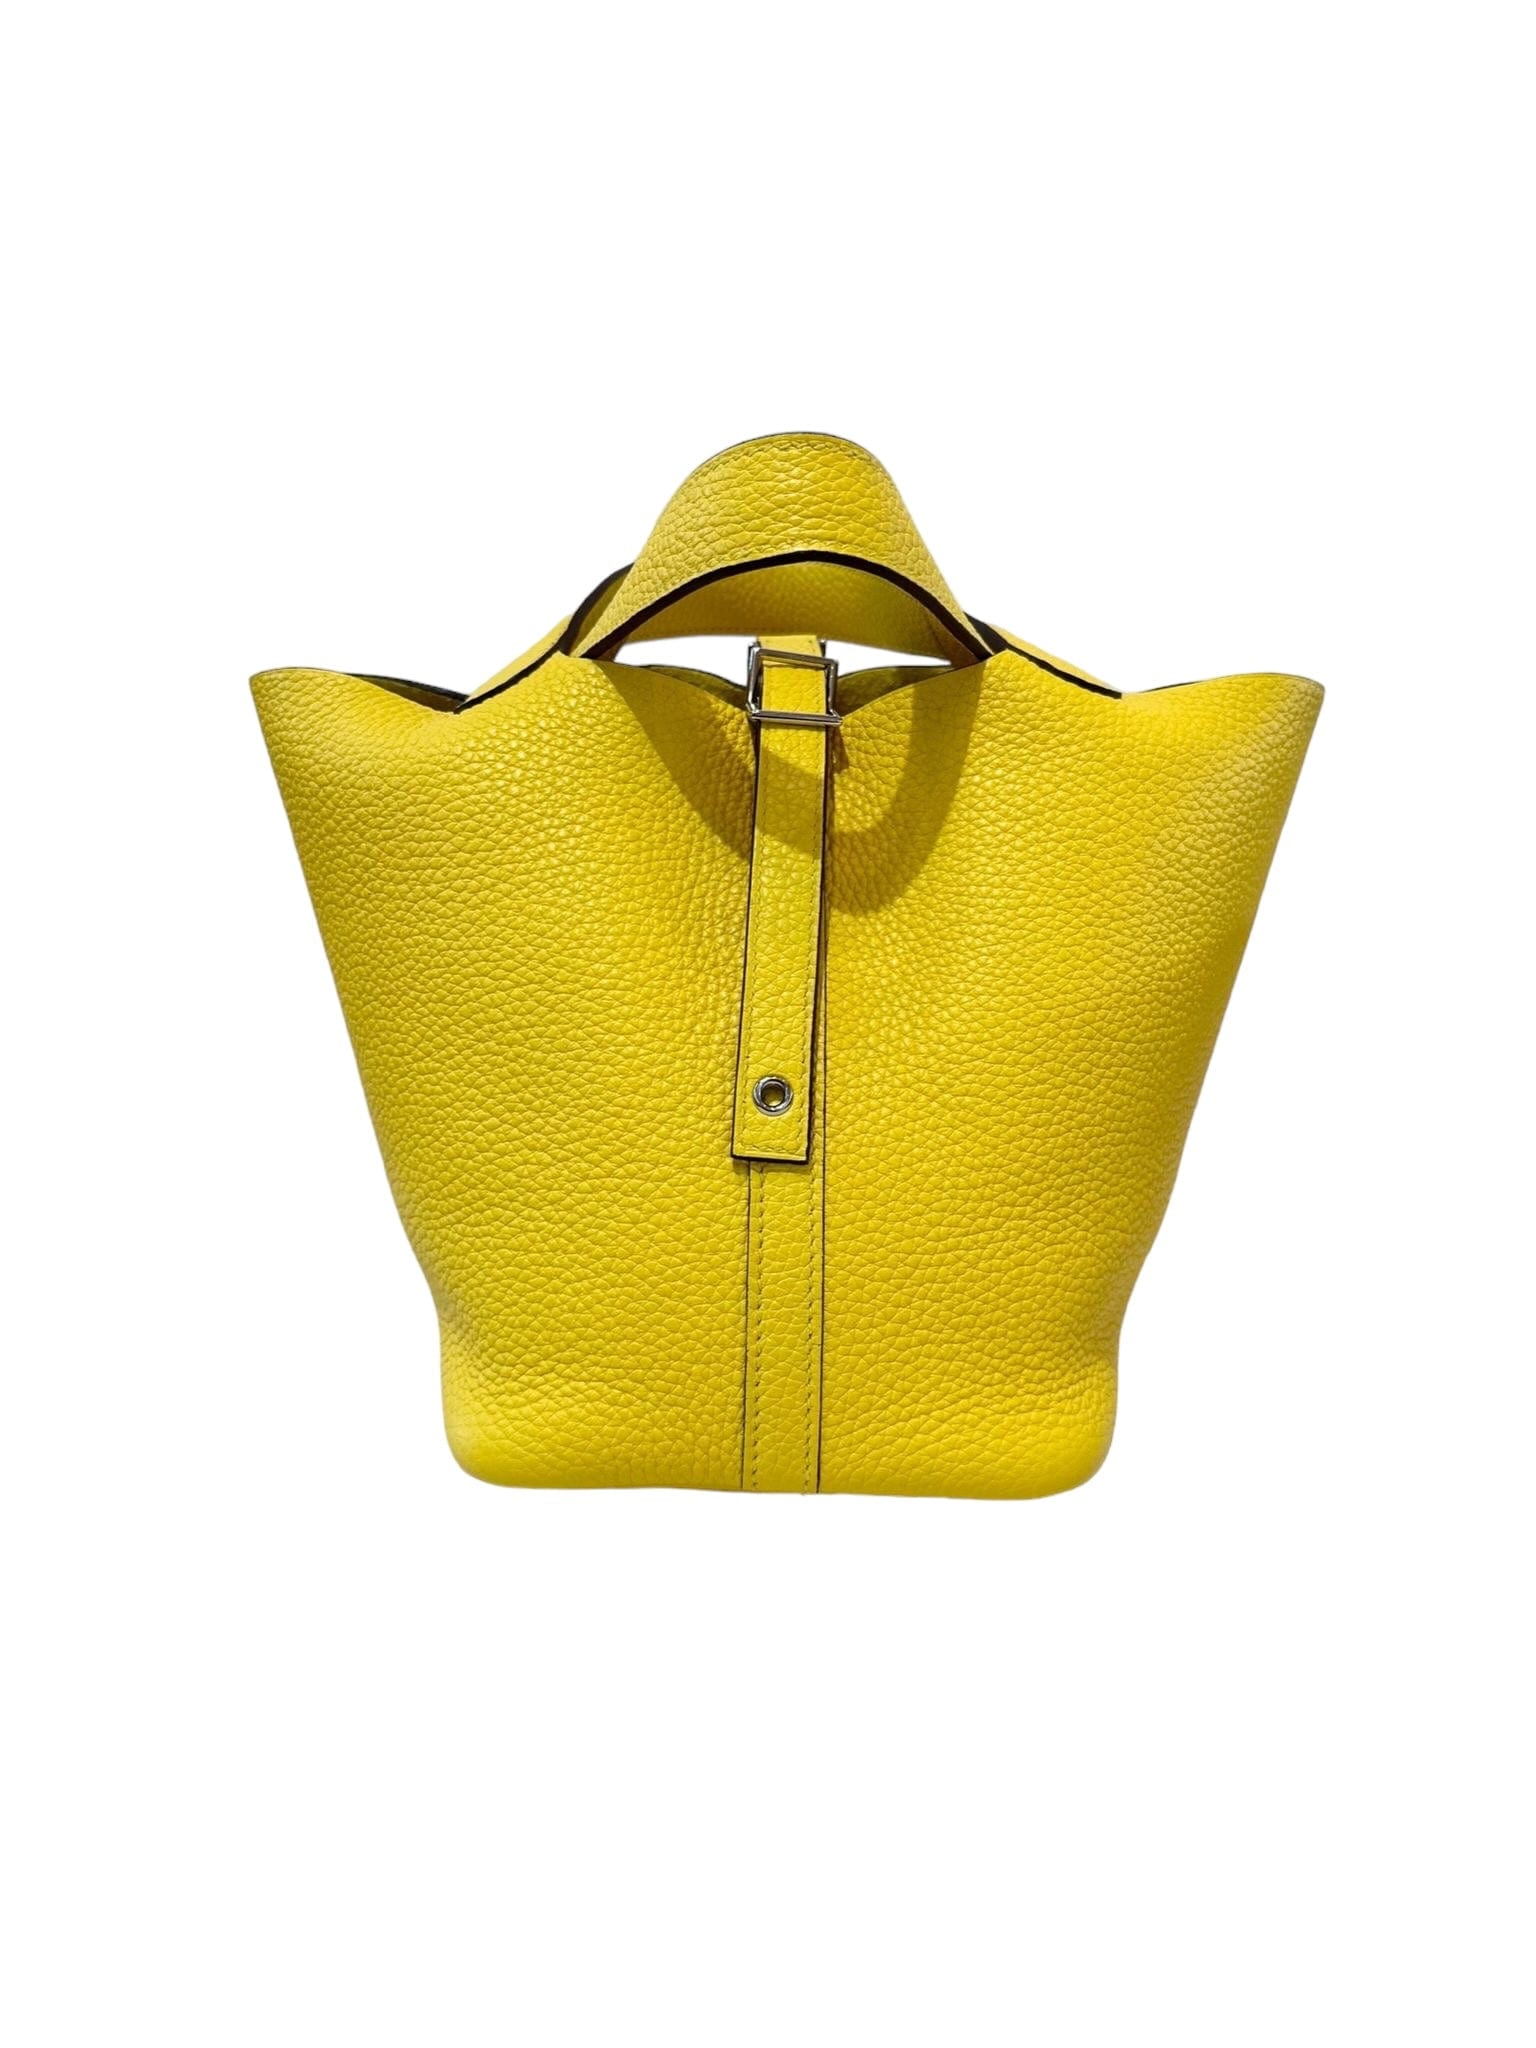 Hermes Hermes Yellow Picotin 18 with PHW